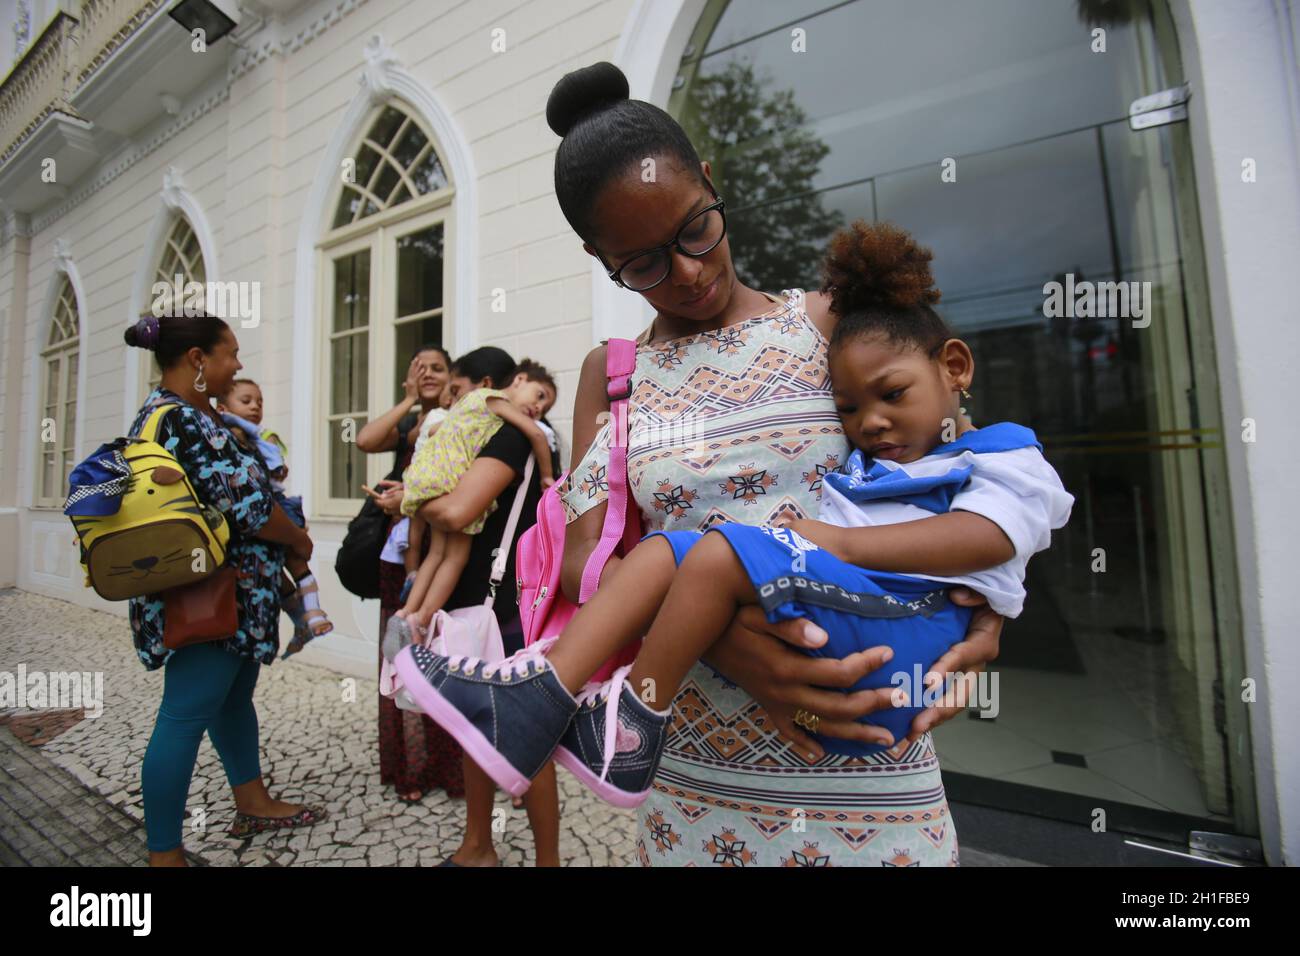 salvador, bahia / brazil - april 17, 2018: Children with microcephaly are seen seeking justice at the Public Prosecution Service in Salvador. The dise Stock Photo